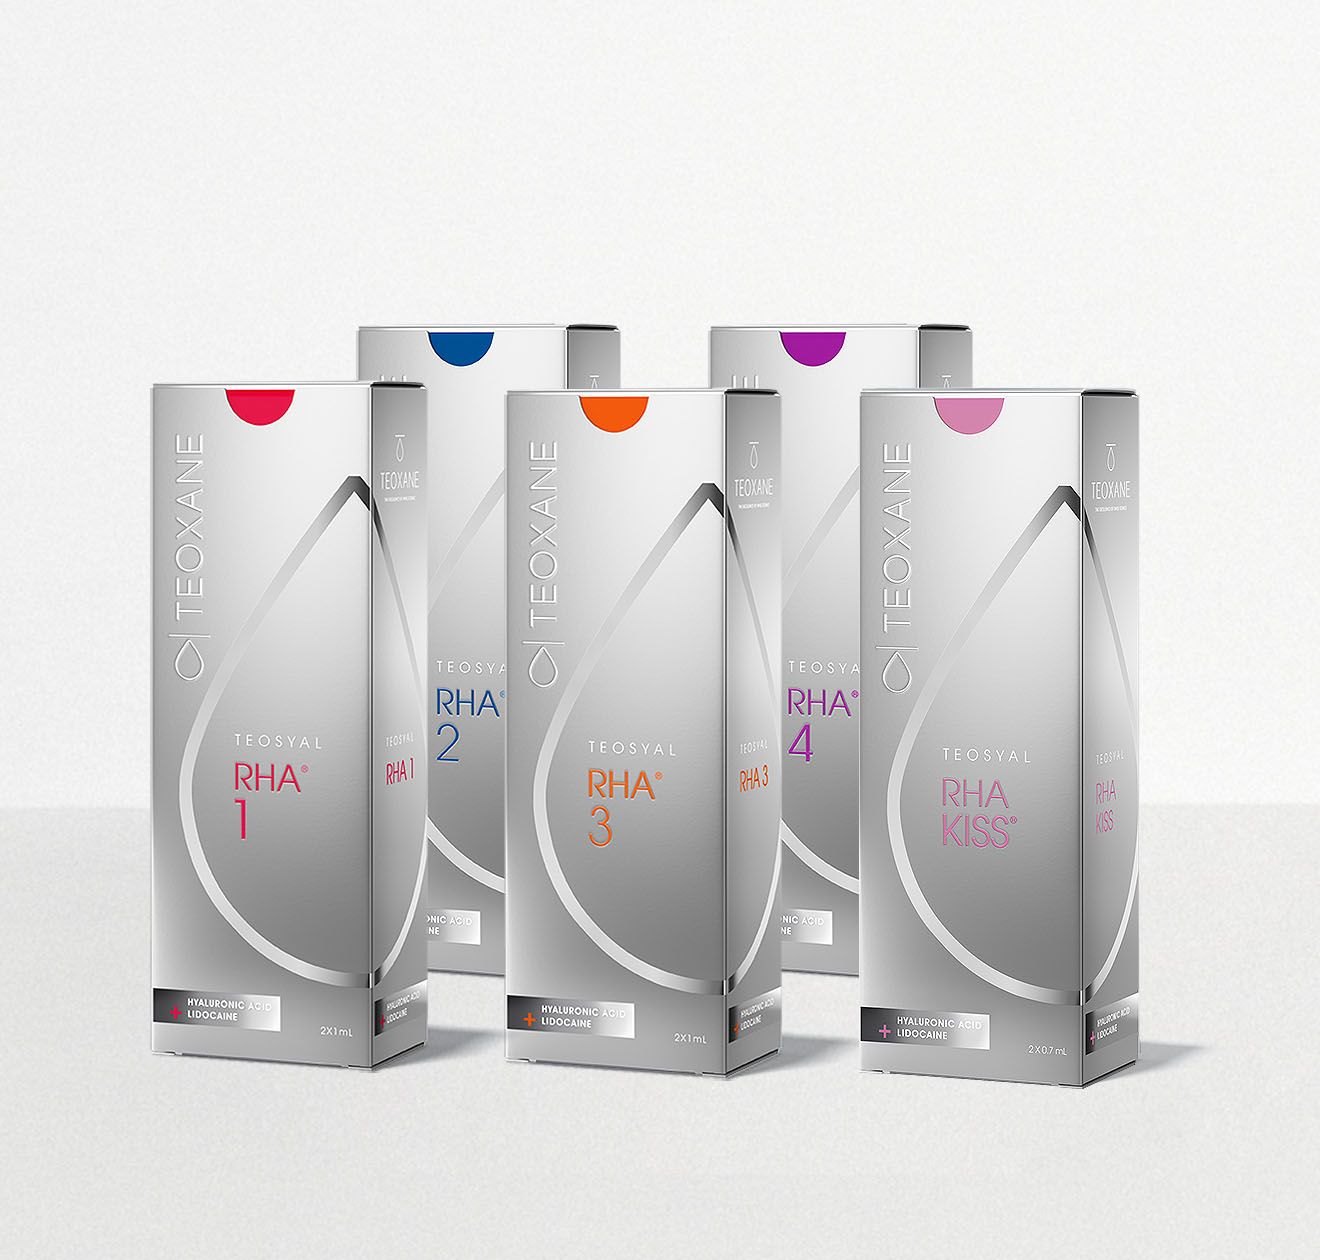 Move beyond conventional HA fillers and recommend TEOXANE’s versatile TEOSYAL RHA® range 